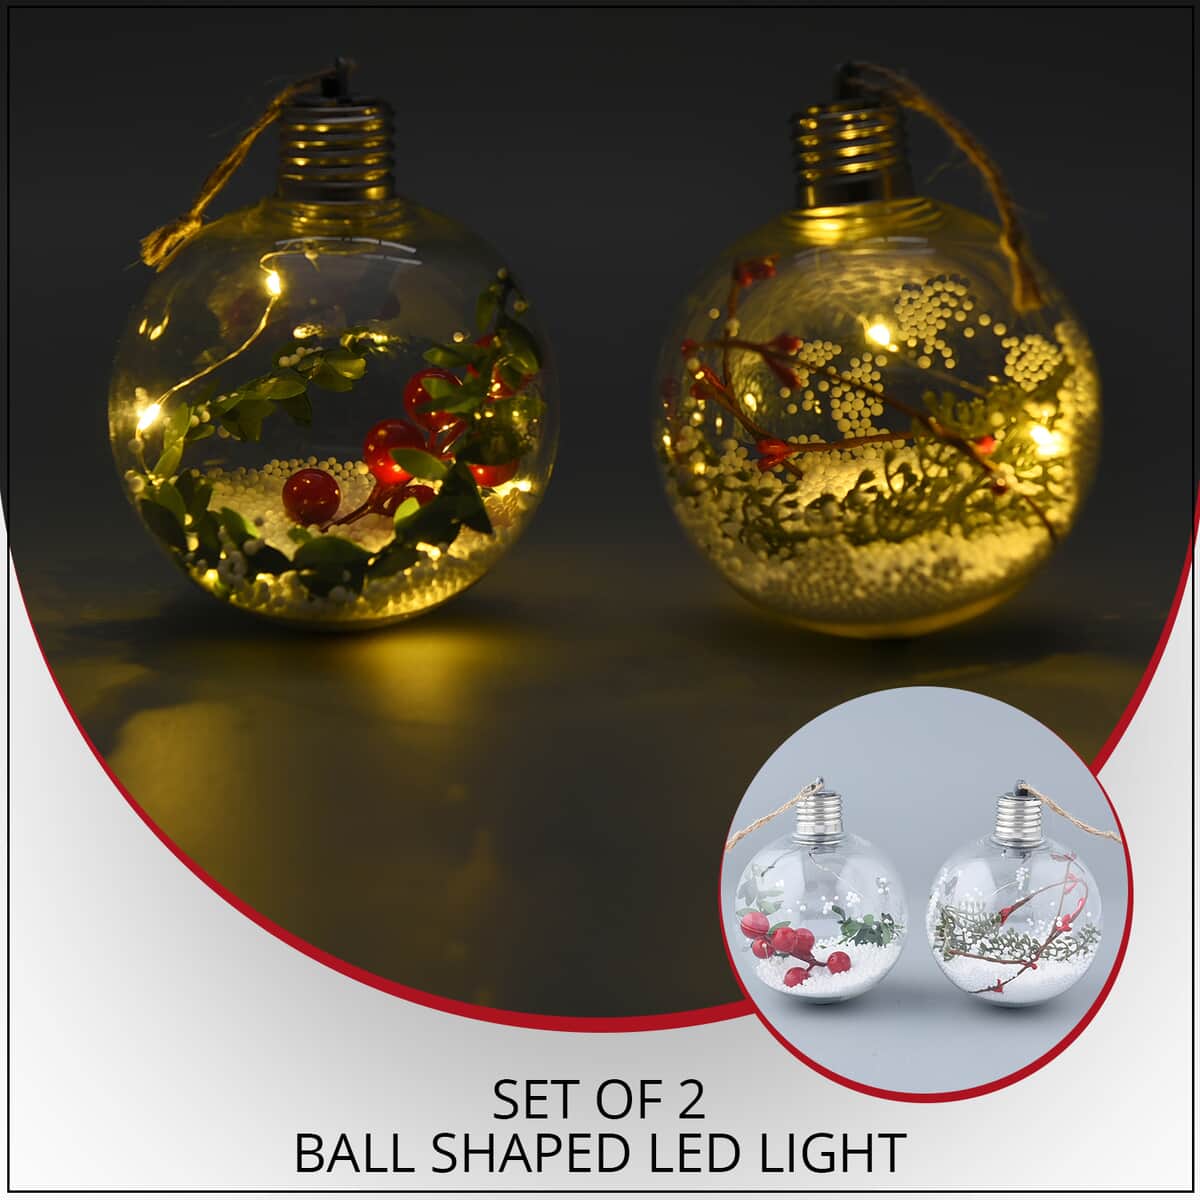 Set of 2 Ball-shaped LED Light (3LR44 Battery Not Included) image number 1